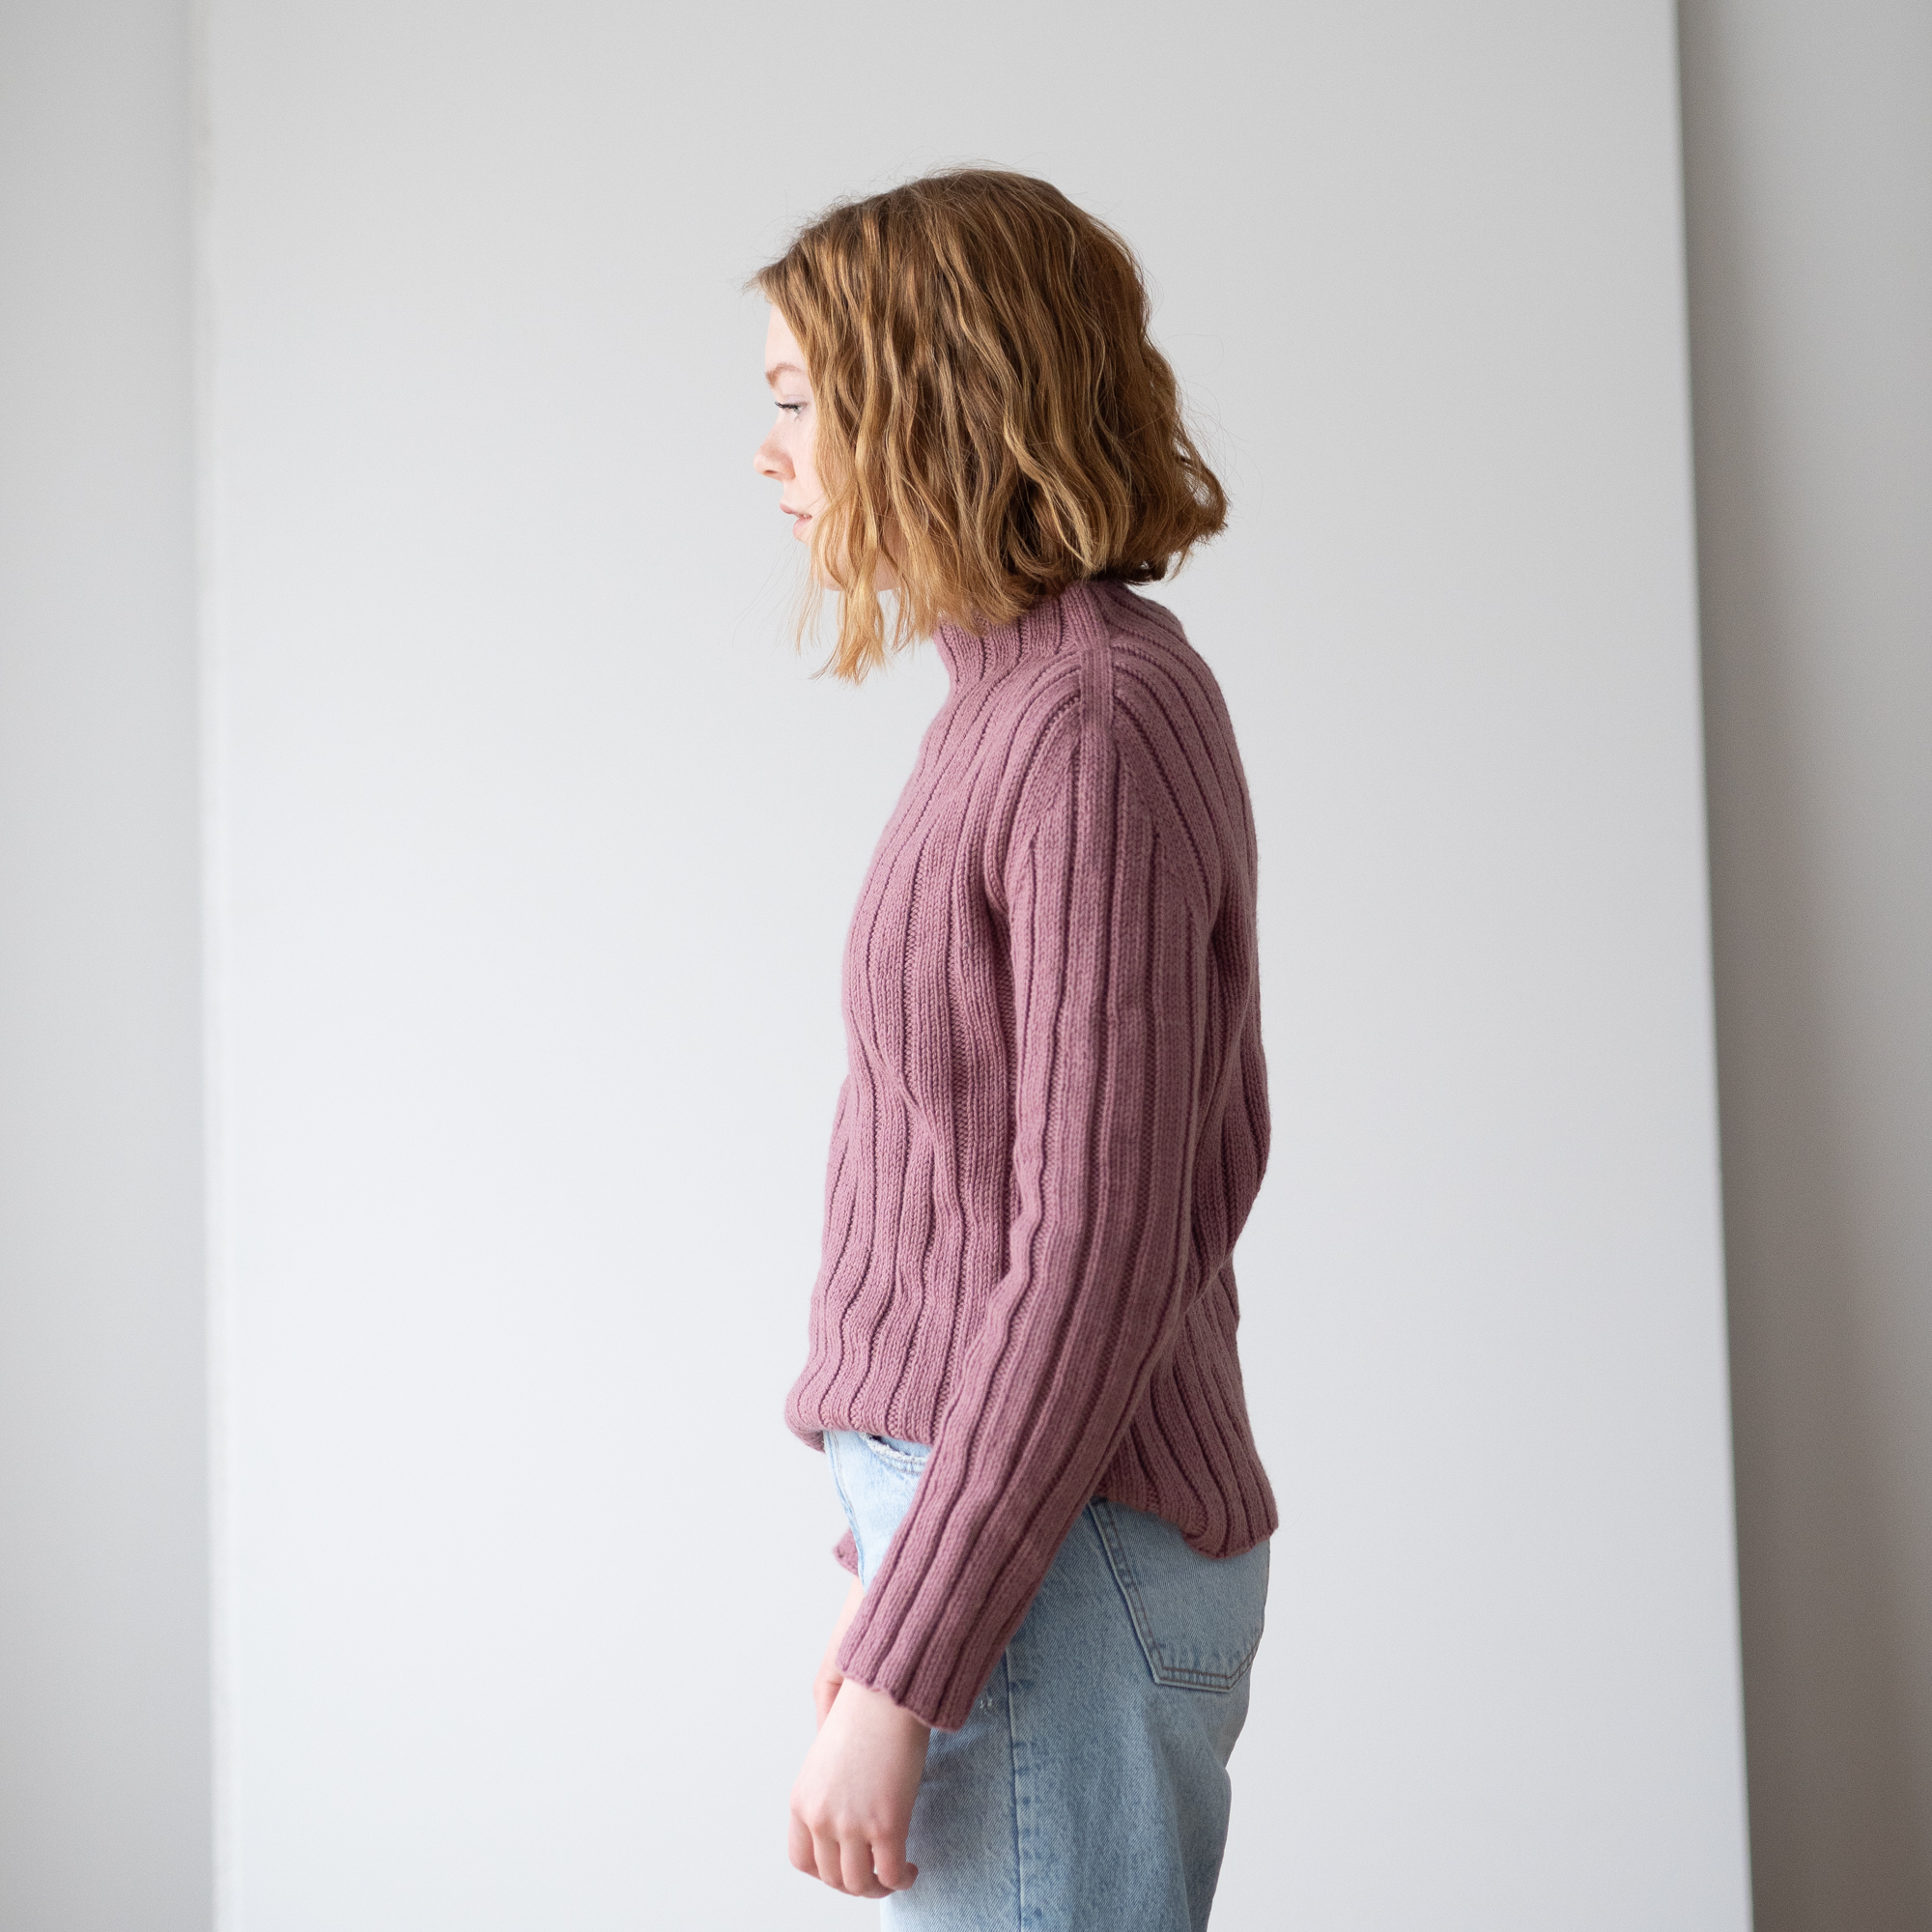  - Cést la vie sweater | Womens ribbed sweater| Knitting kit - by HipKnitShop - 08/03/2021